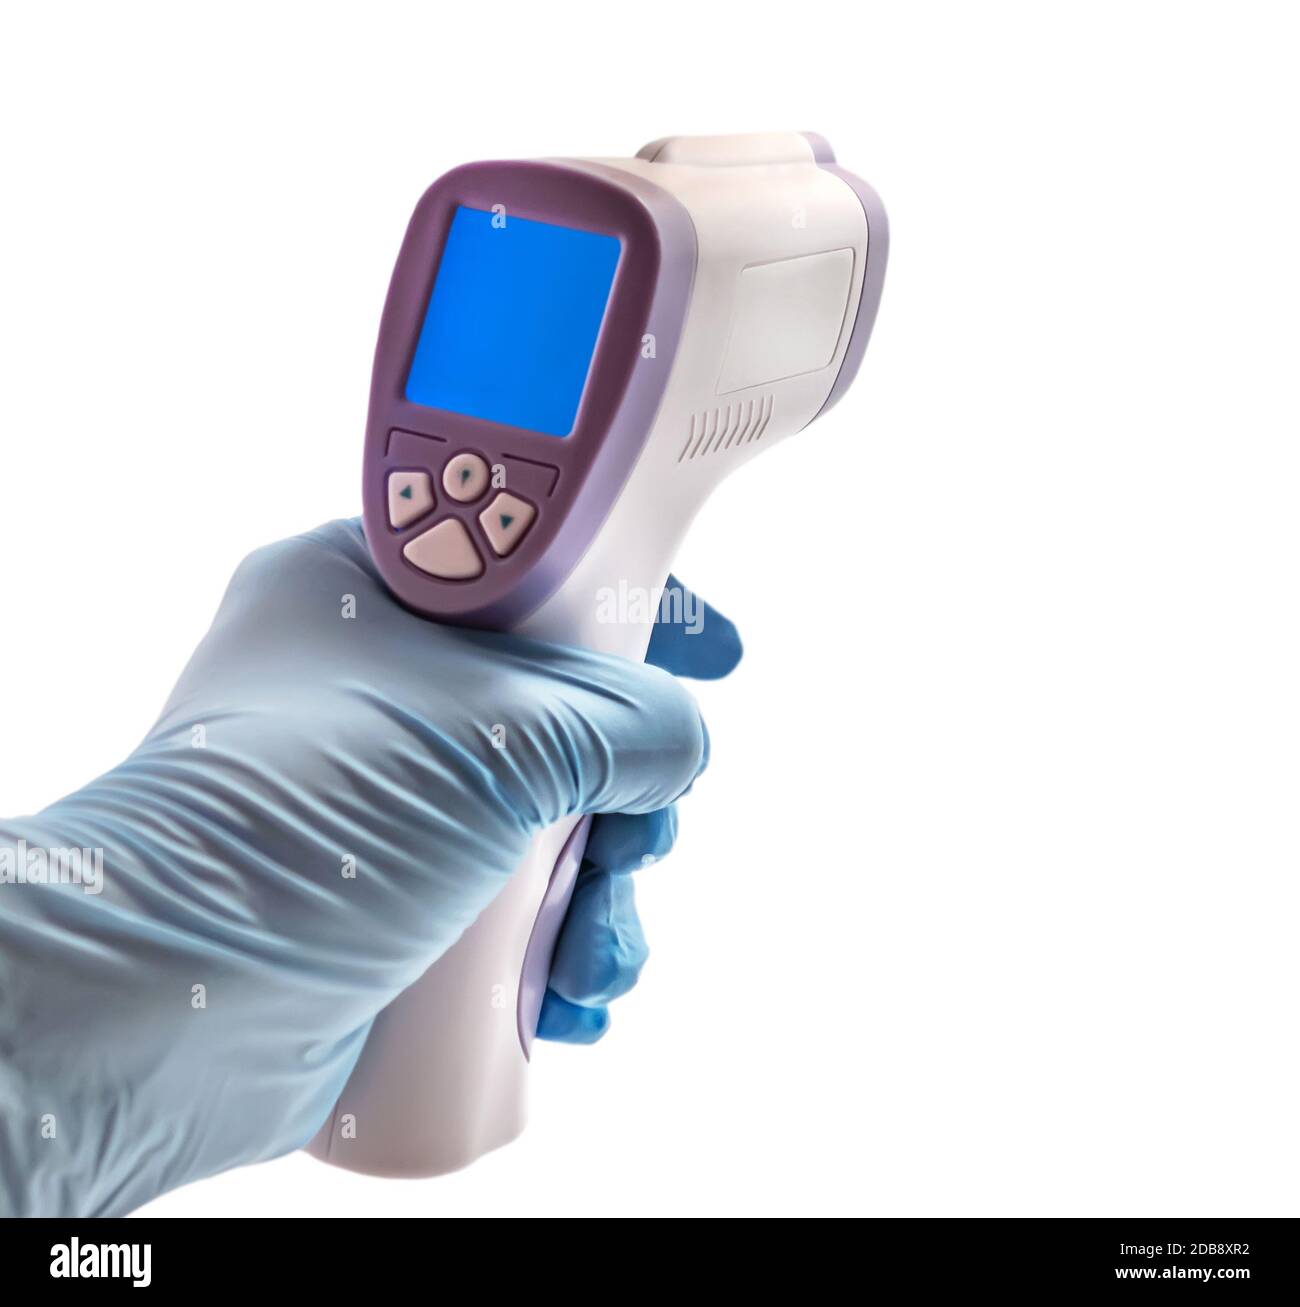 Thermometer Medical Digital Non-Contact Infrared with blue blank screen. Temperature  Measurement Device isolated on white background. healthcare medic Stock  Photo - Alamy